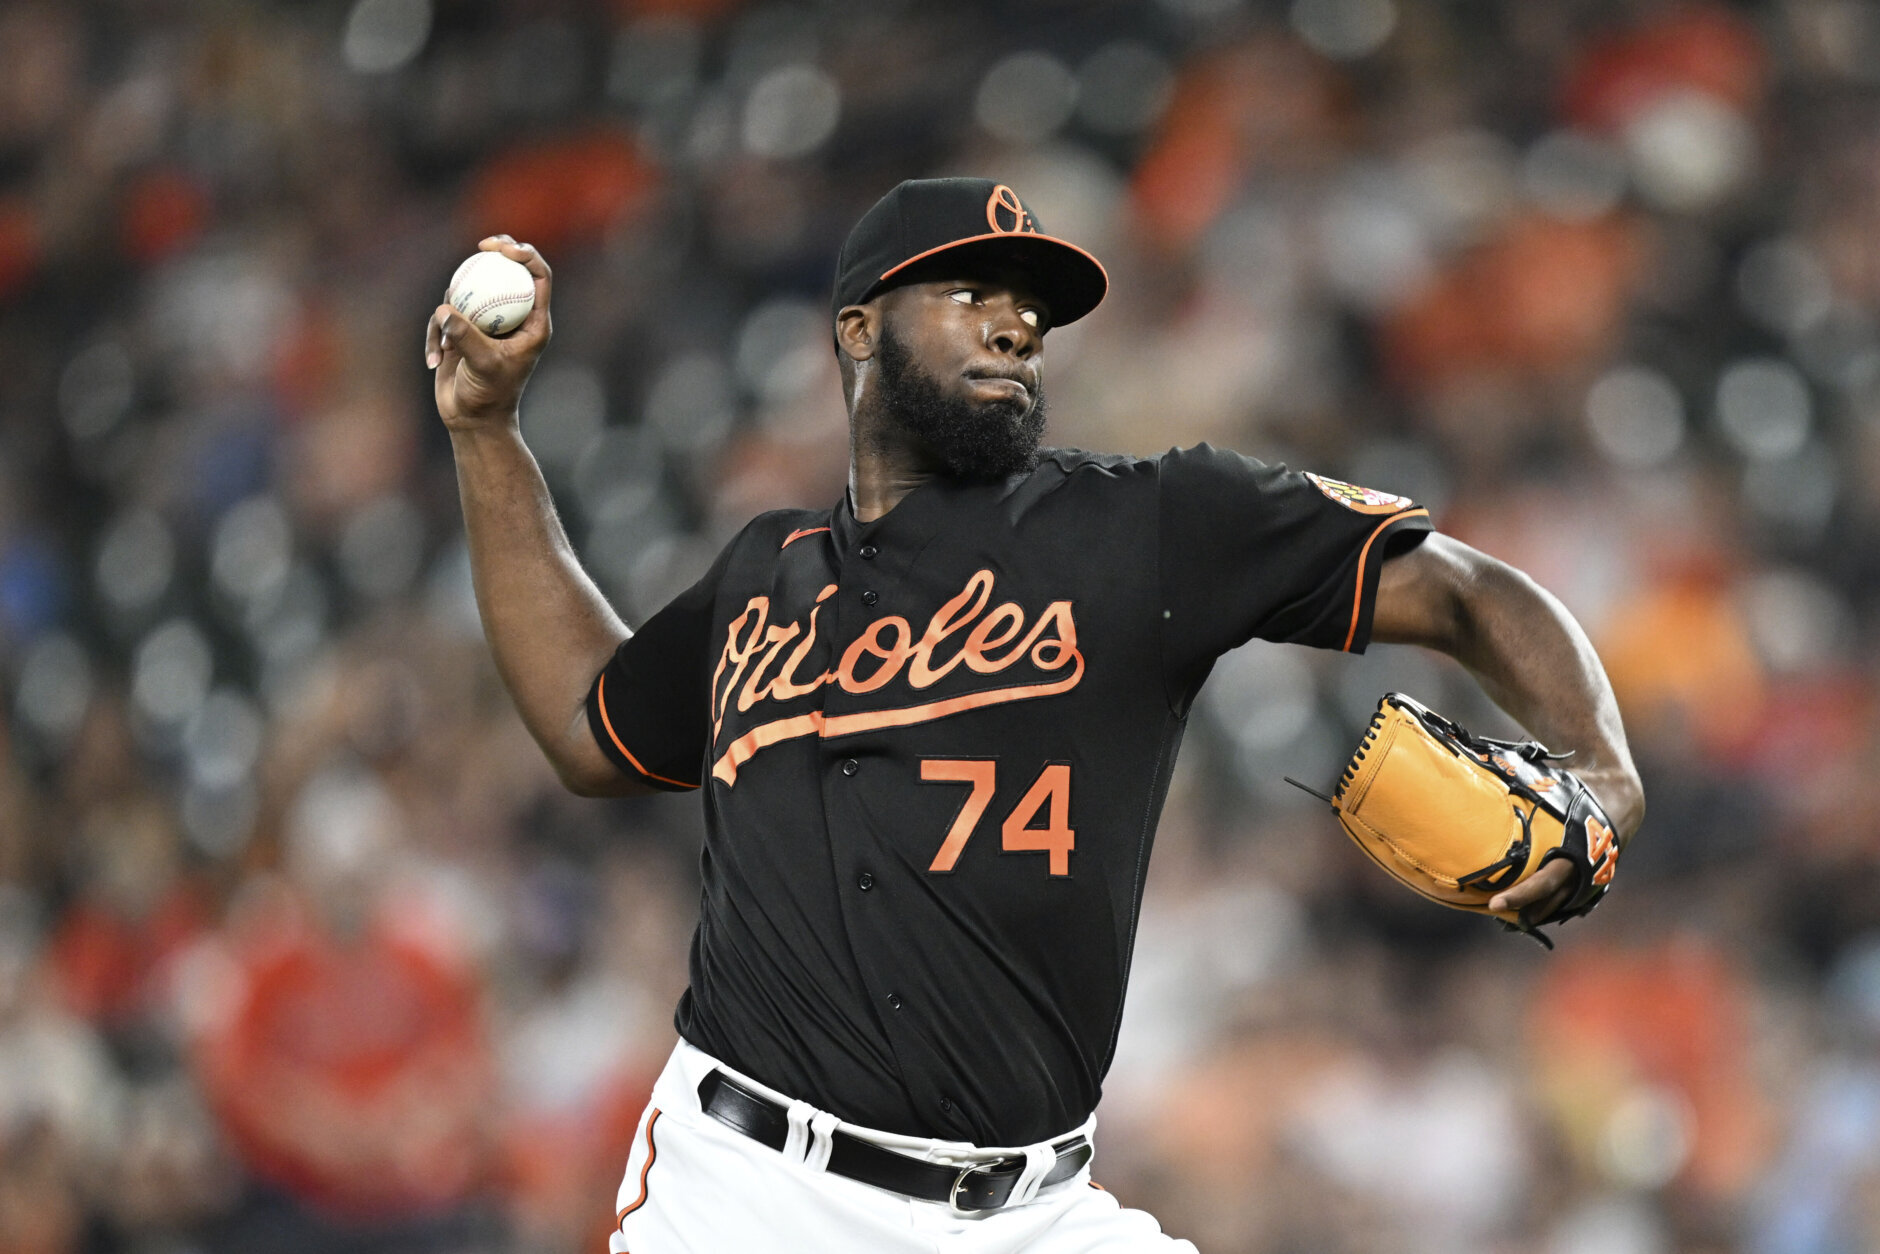 Cedric Mullins hits for the cycle as Orioles beat Pirates 6-3 - WTOP News